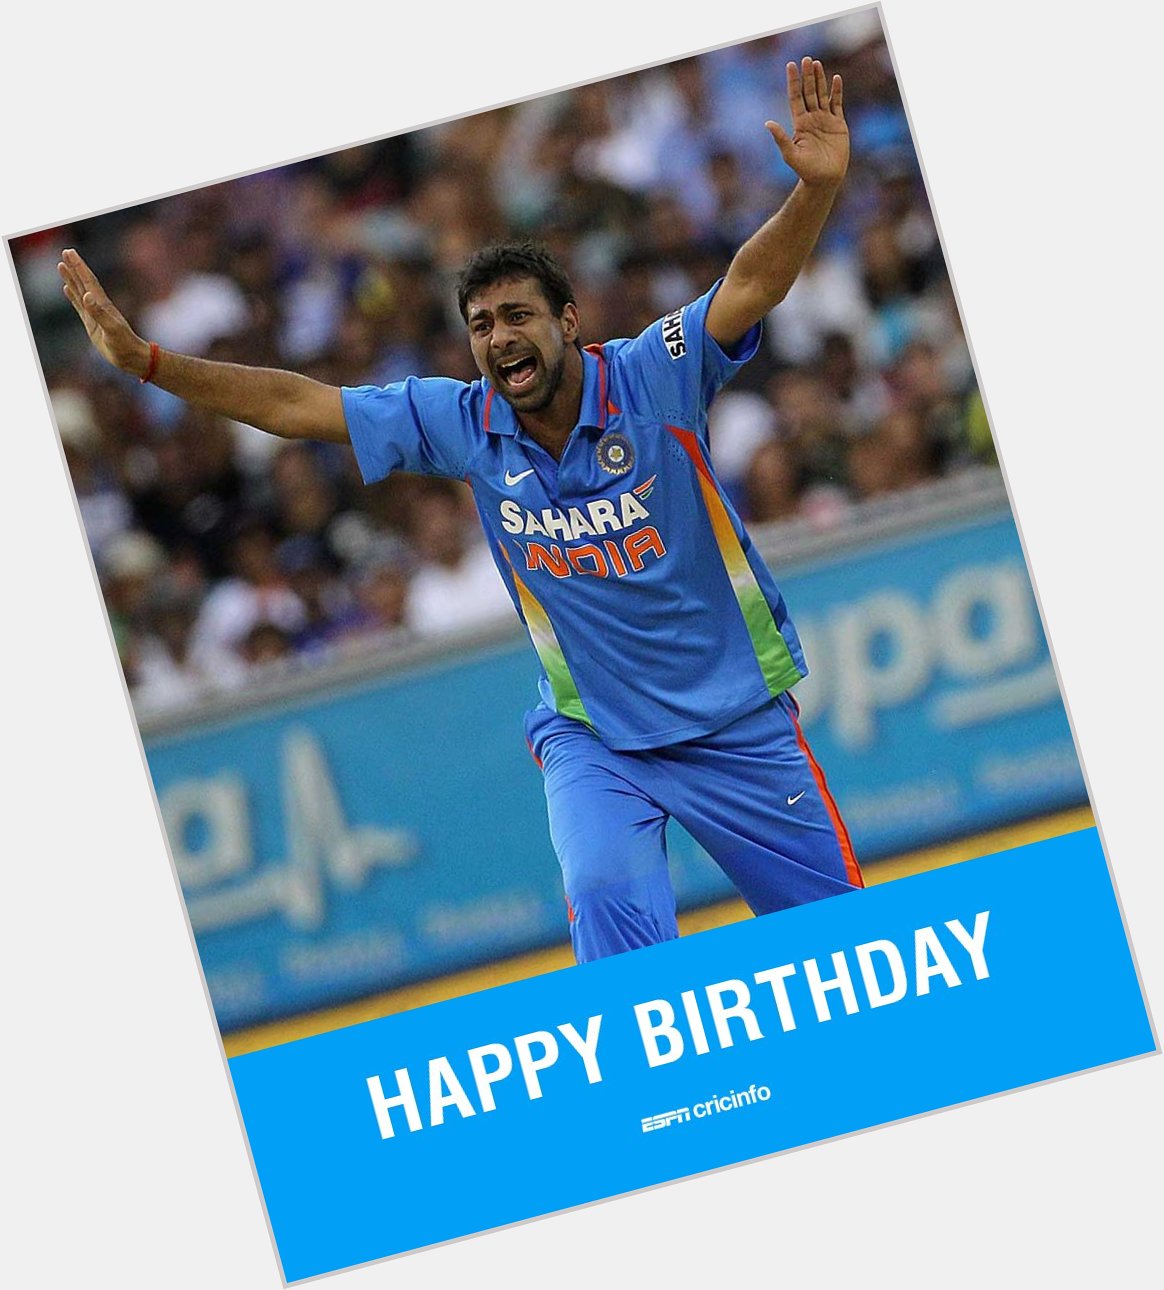  Happy birthday to Praveen Kumar, a cricketer born in a family of wrestlers

 